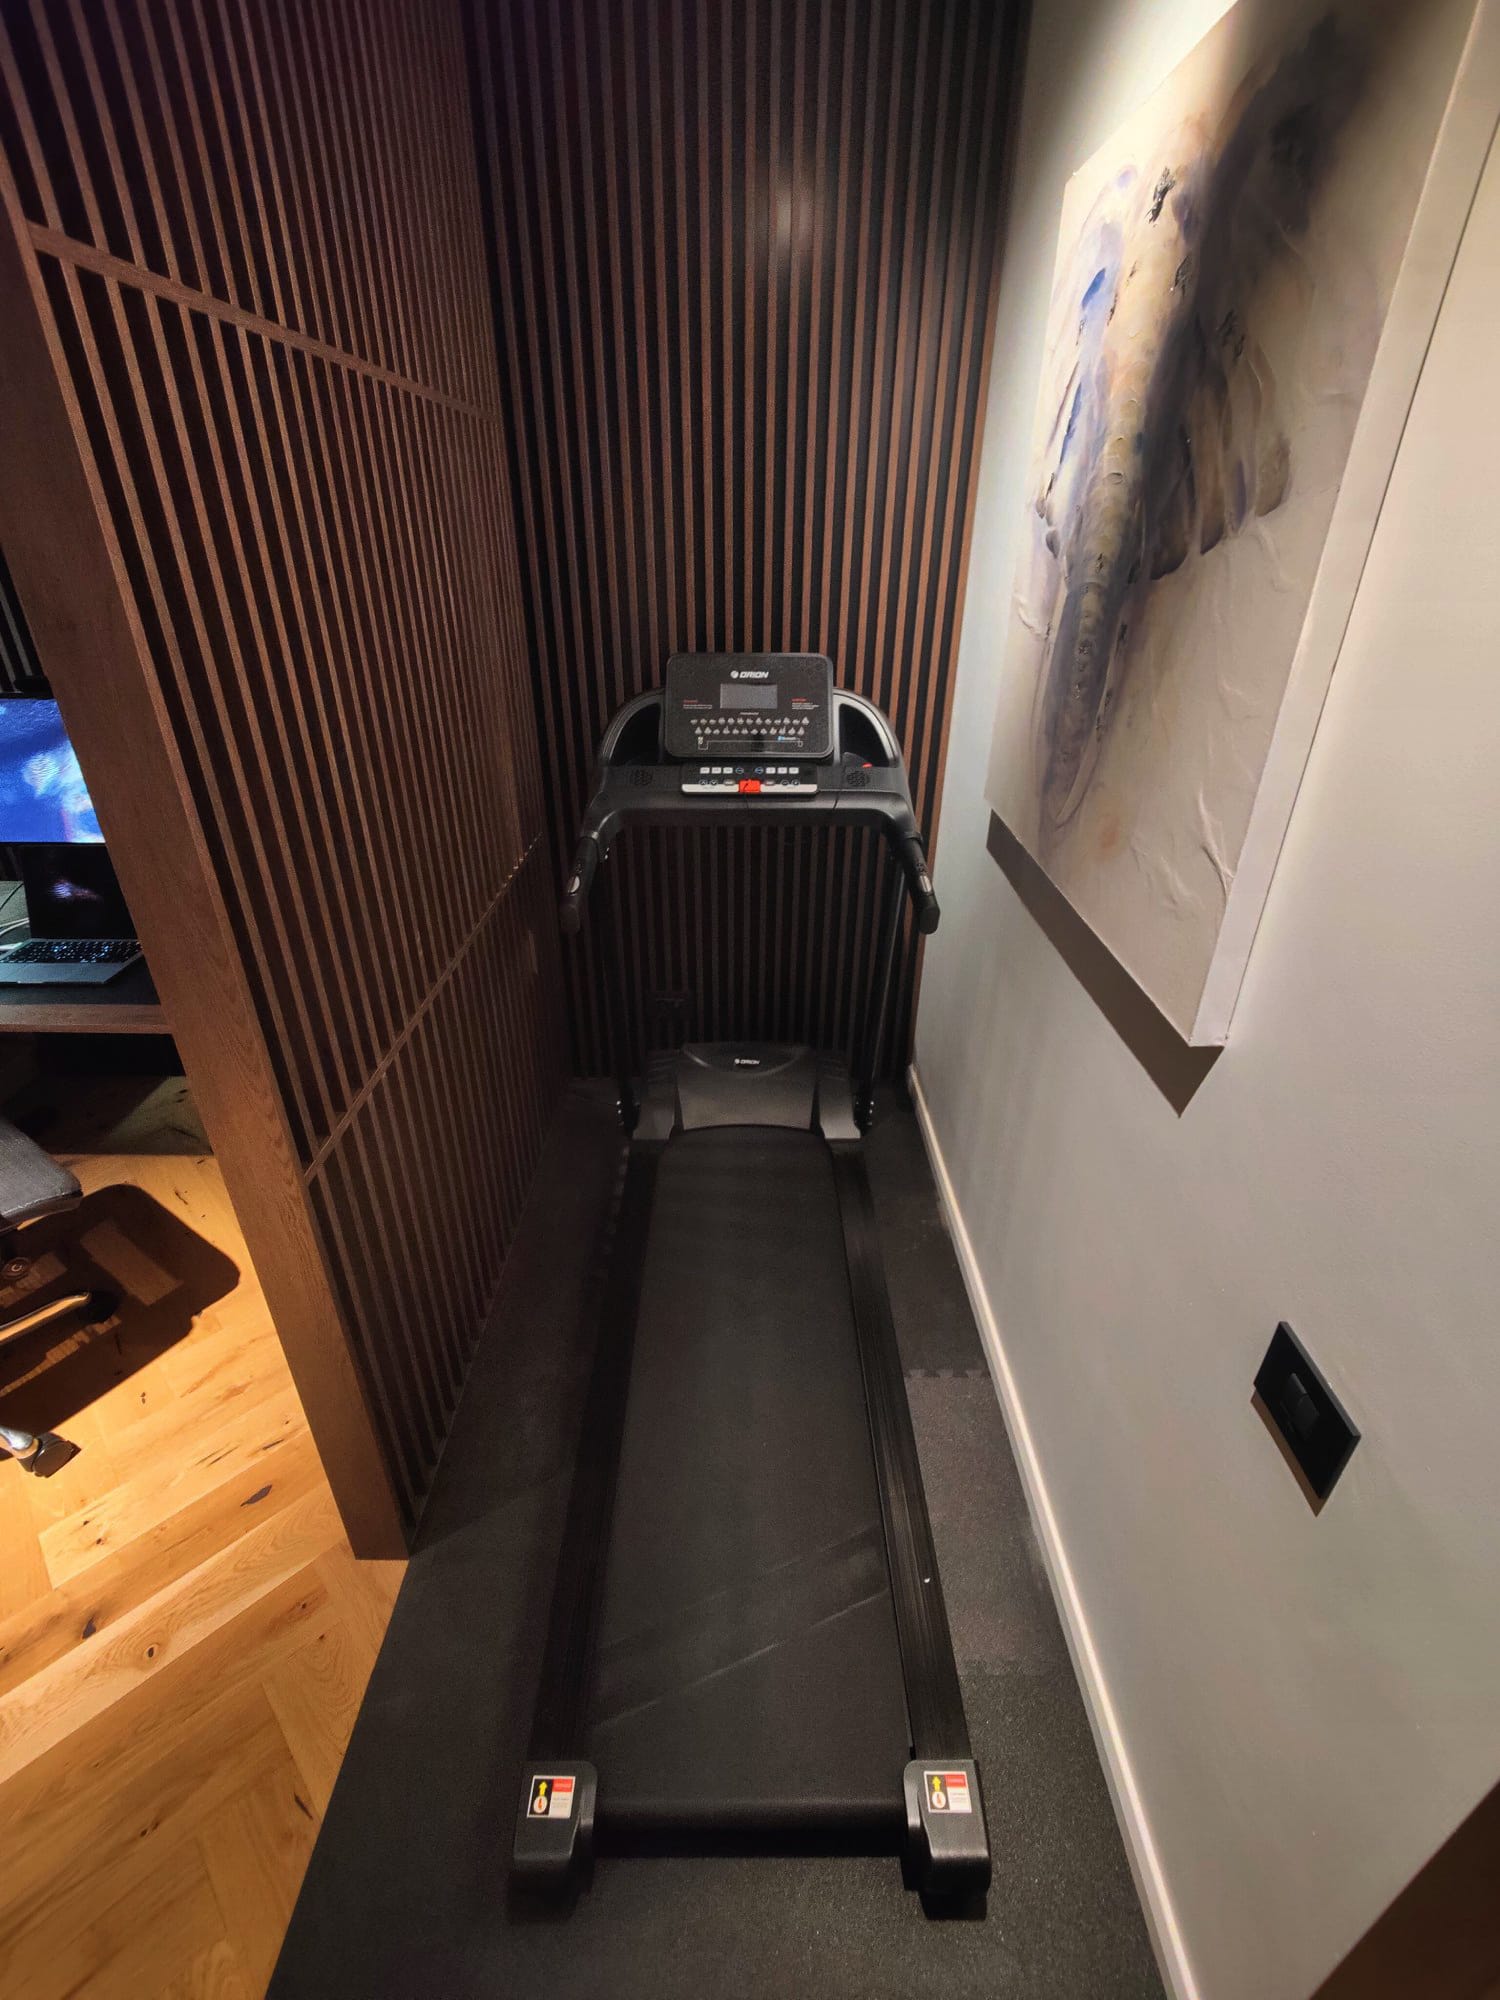 A compact treadmill is positioned against a wall with vertical wooden slats on one side and a large abstract painting on the other, in a room with wooden flooring and soft lighting, suggesting a blend of fitness and art in a home environment